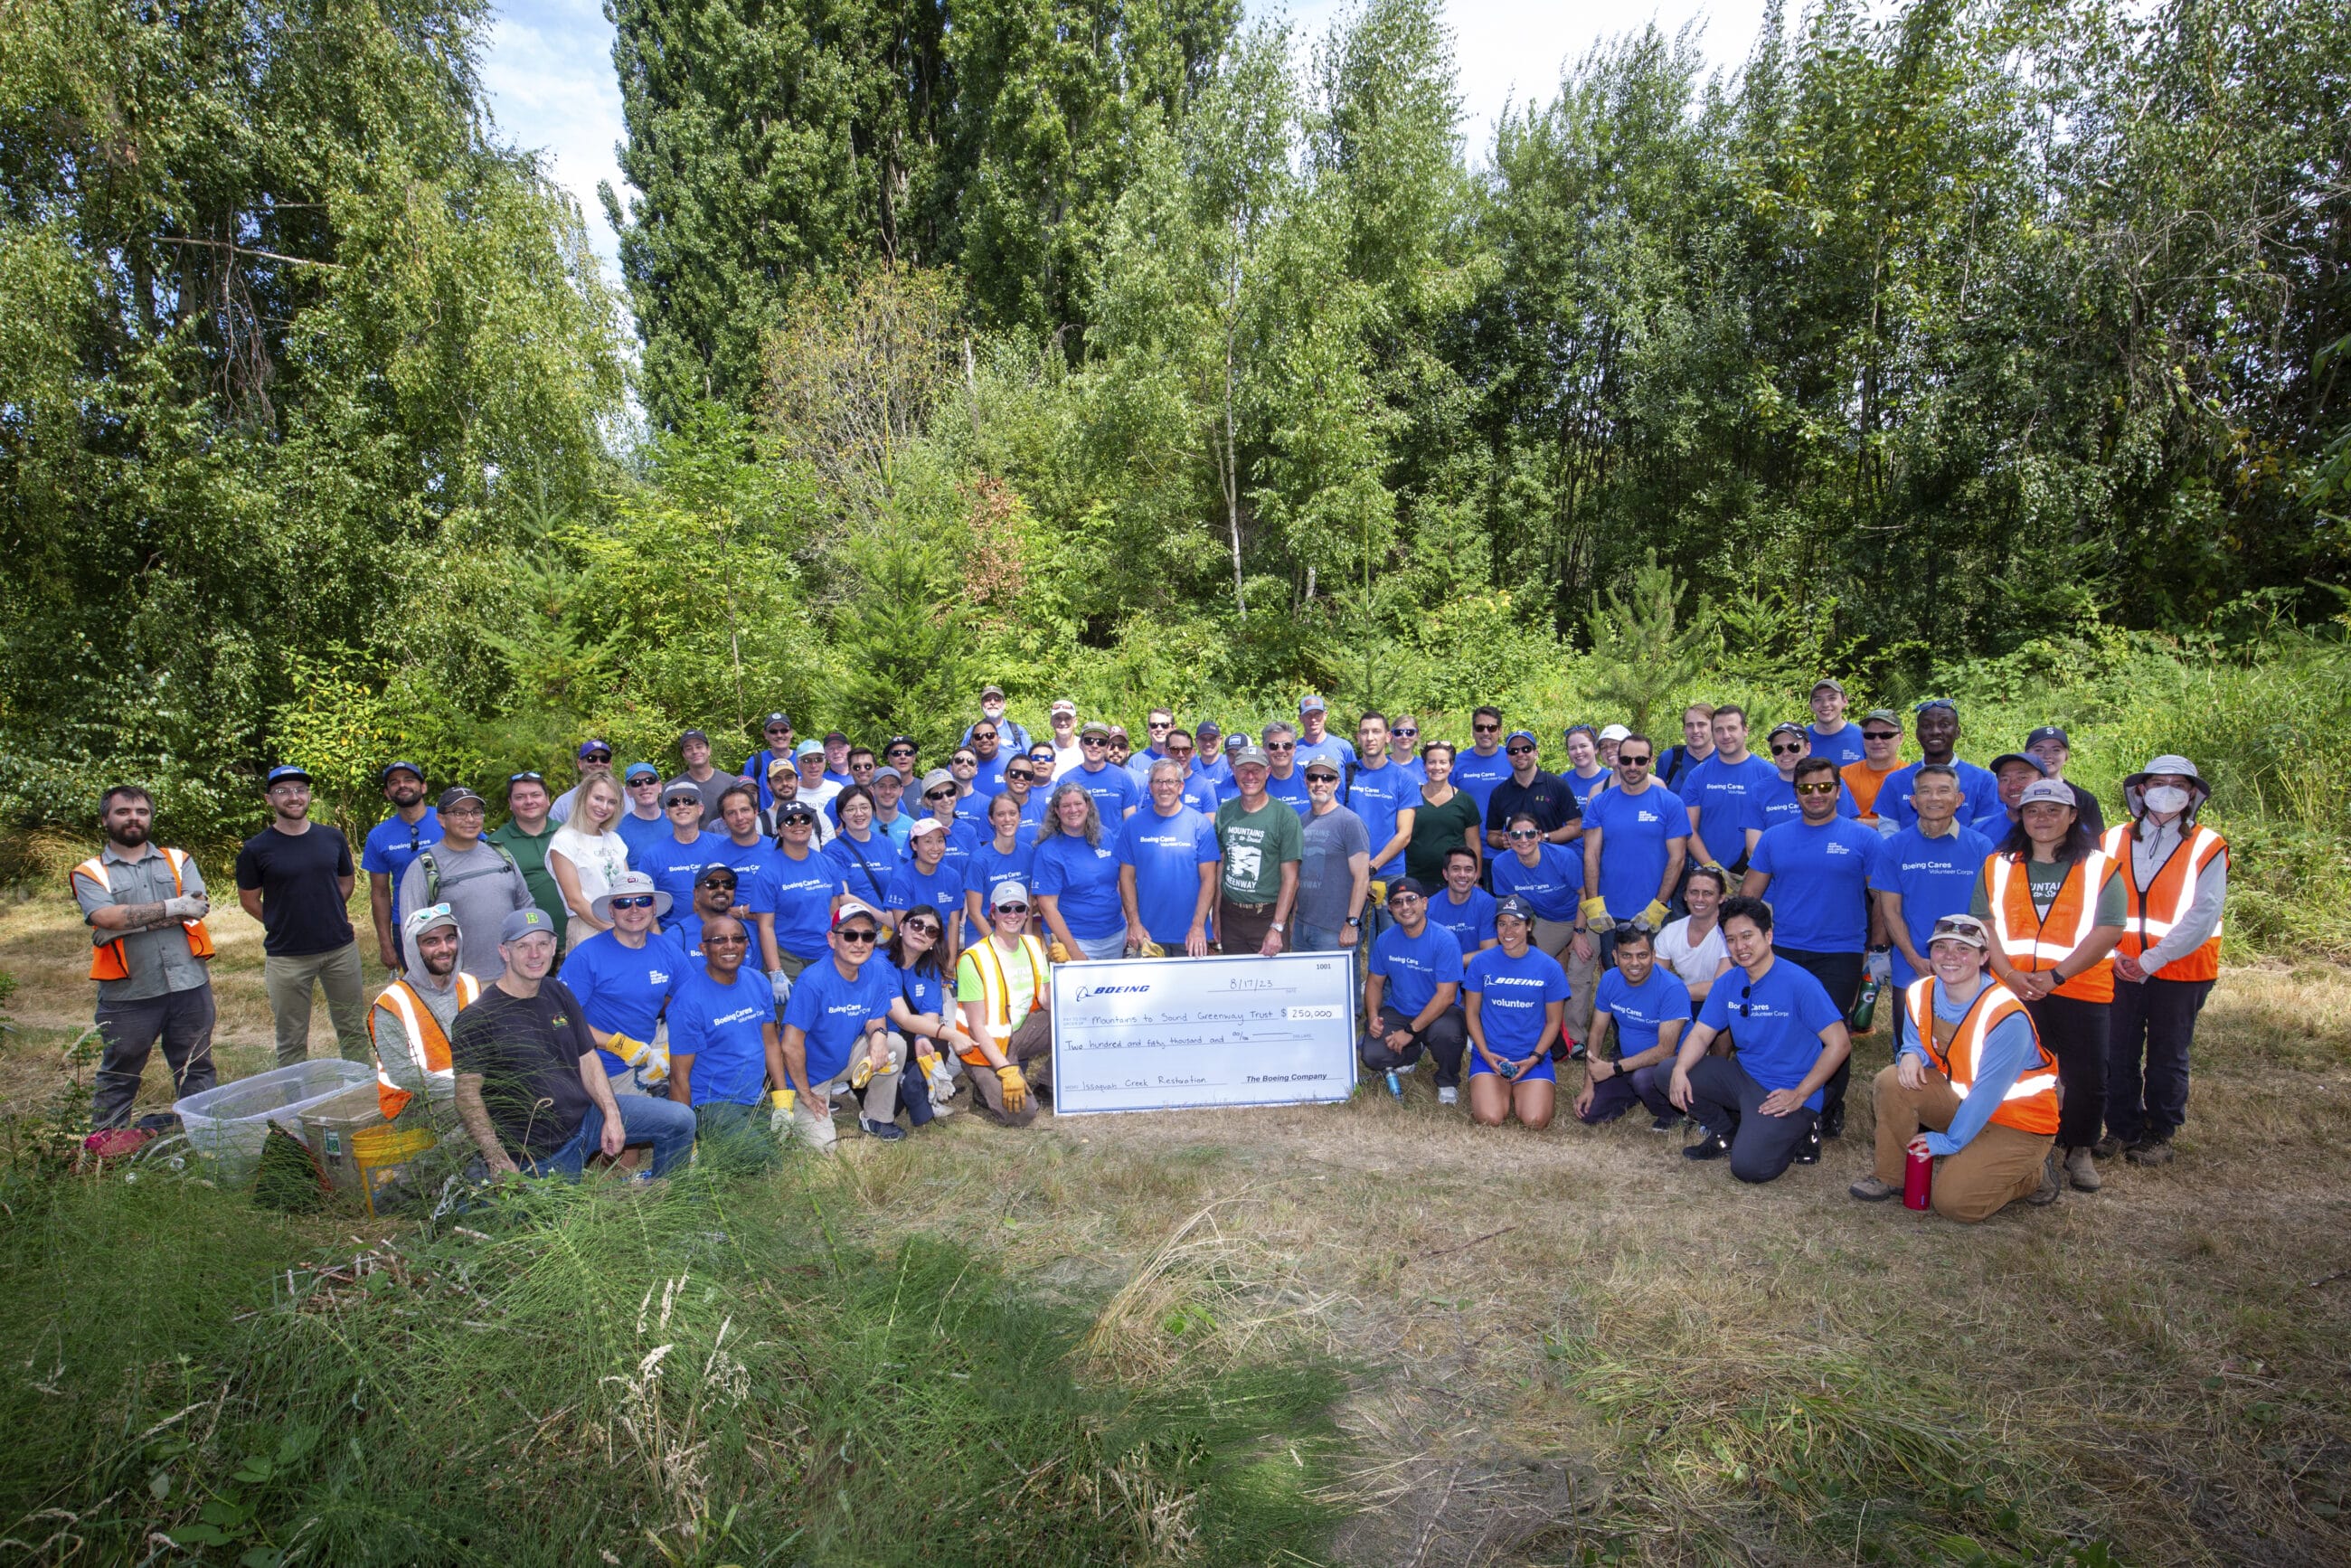 Boeing Supports Vital Salmon-Recovery Work in Lake Sammamish State Park with a $250,000 Grant